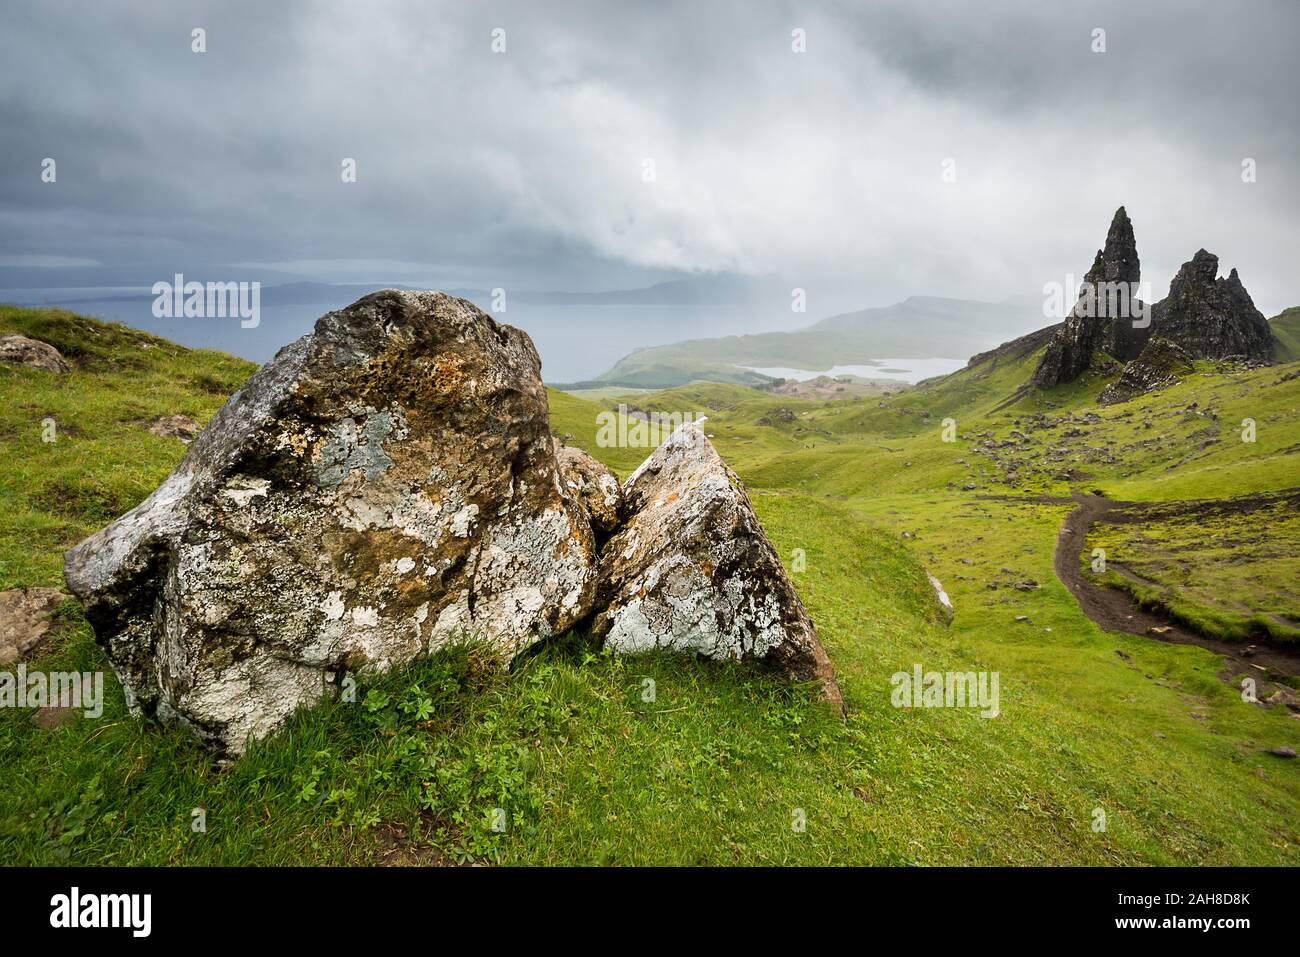 Wide angle view of the iconic scottish Old Man of Storr under a dark cloudy sky Stock Photo